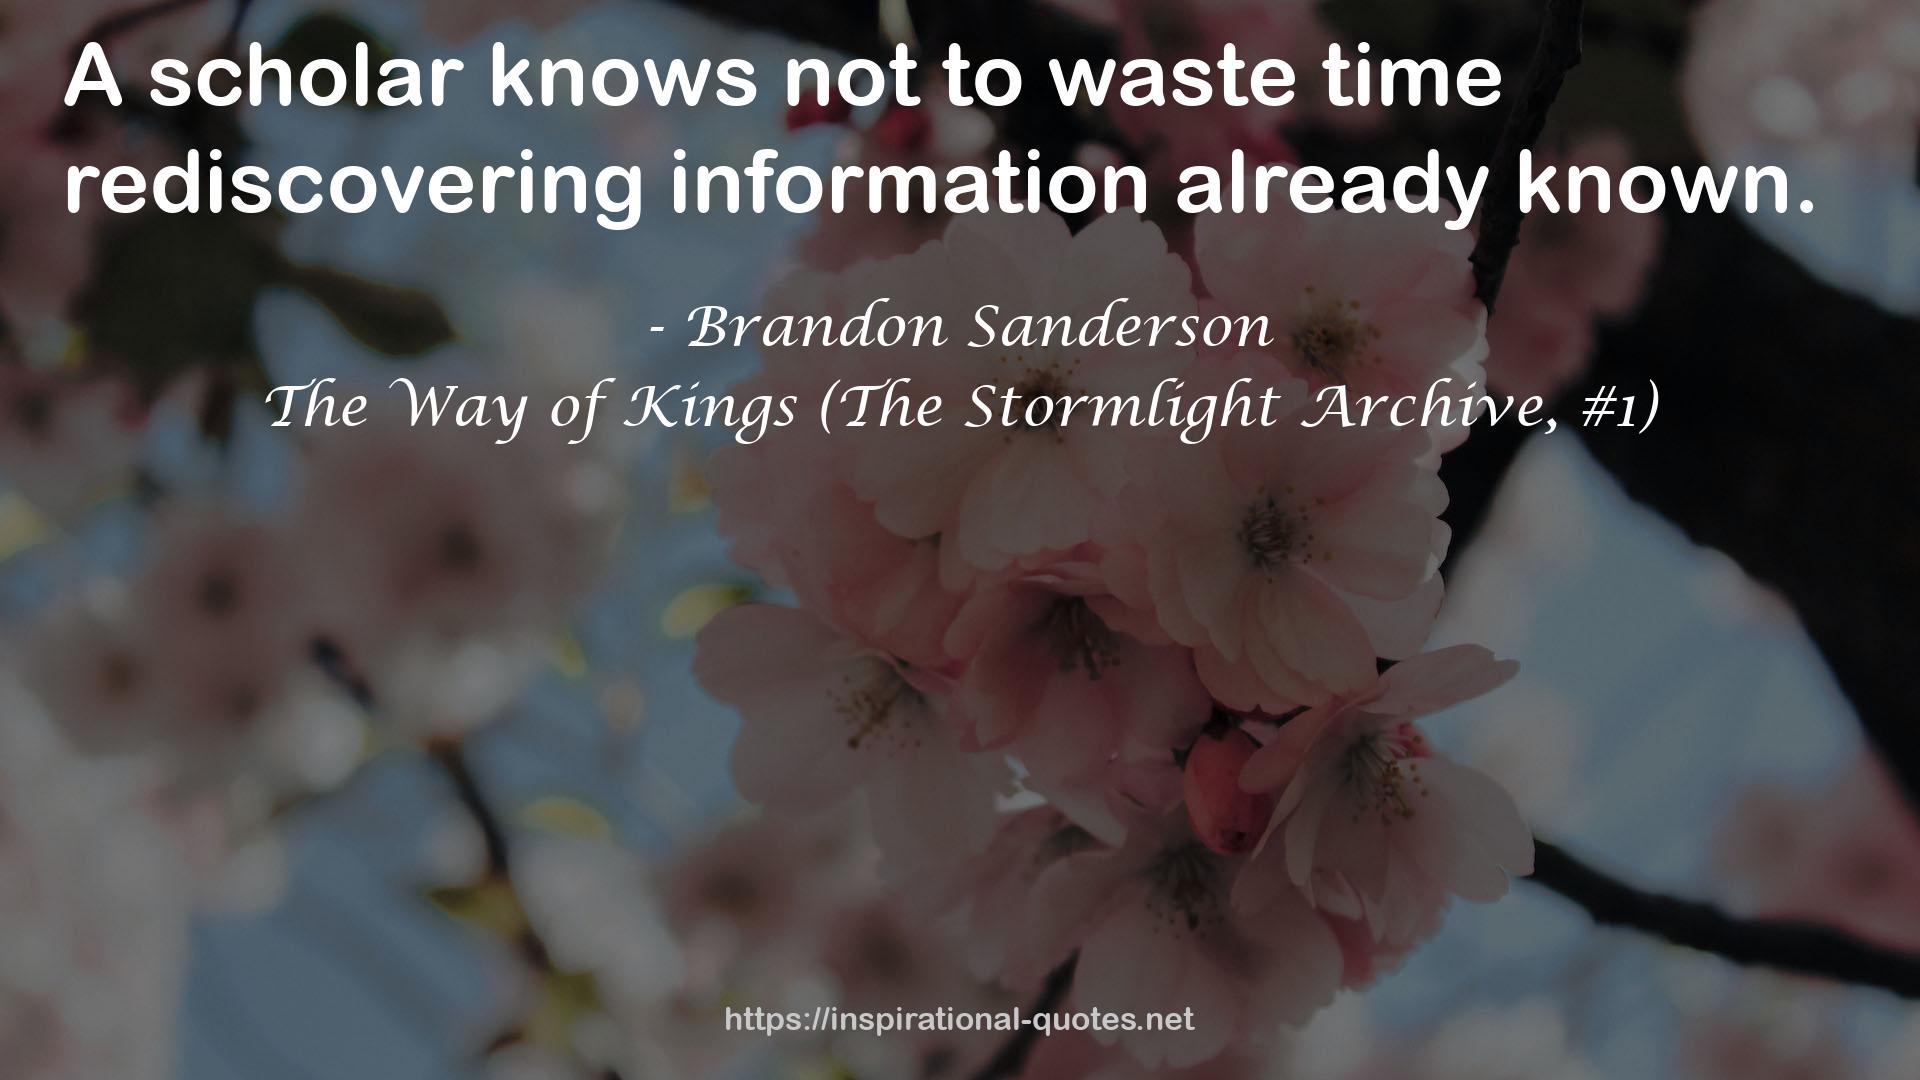 time rediscovering information  QUOTES